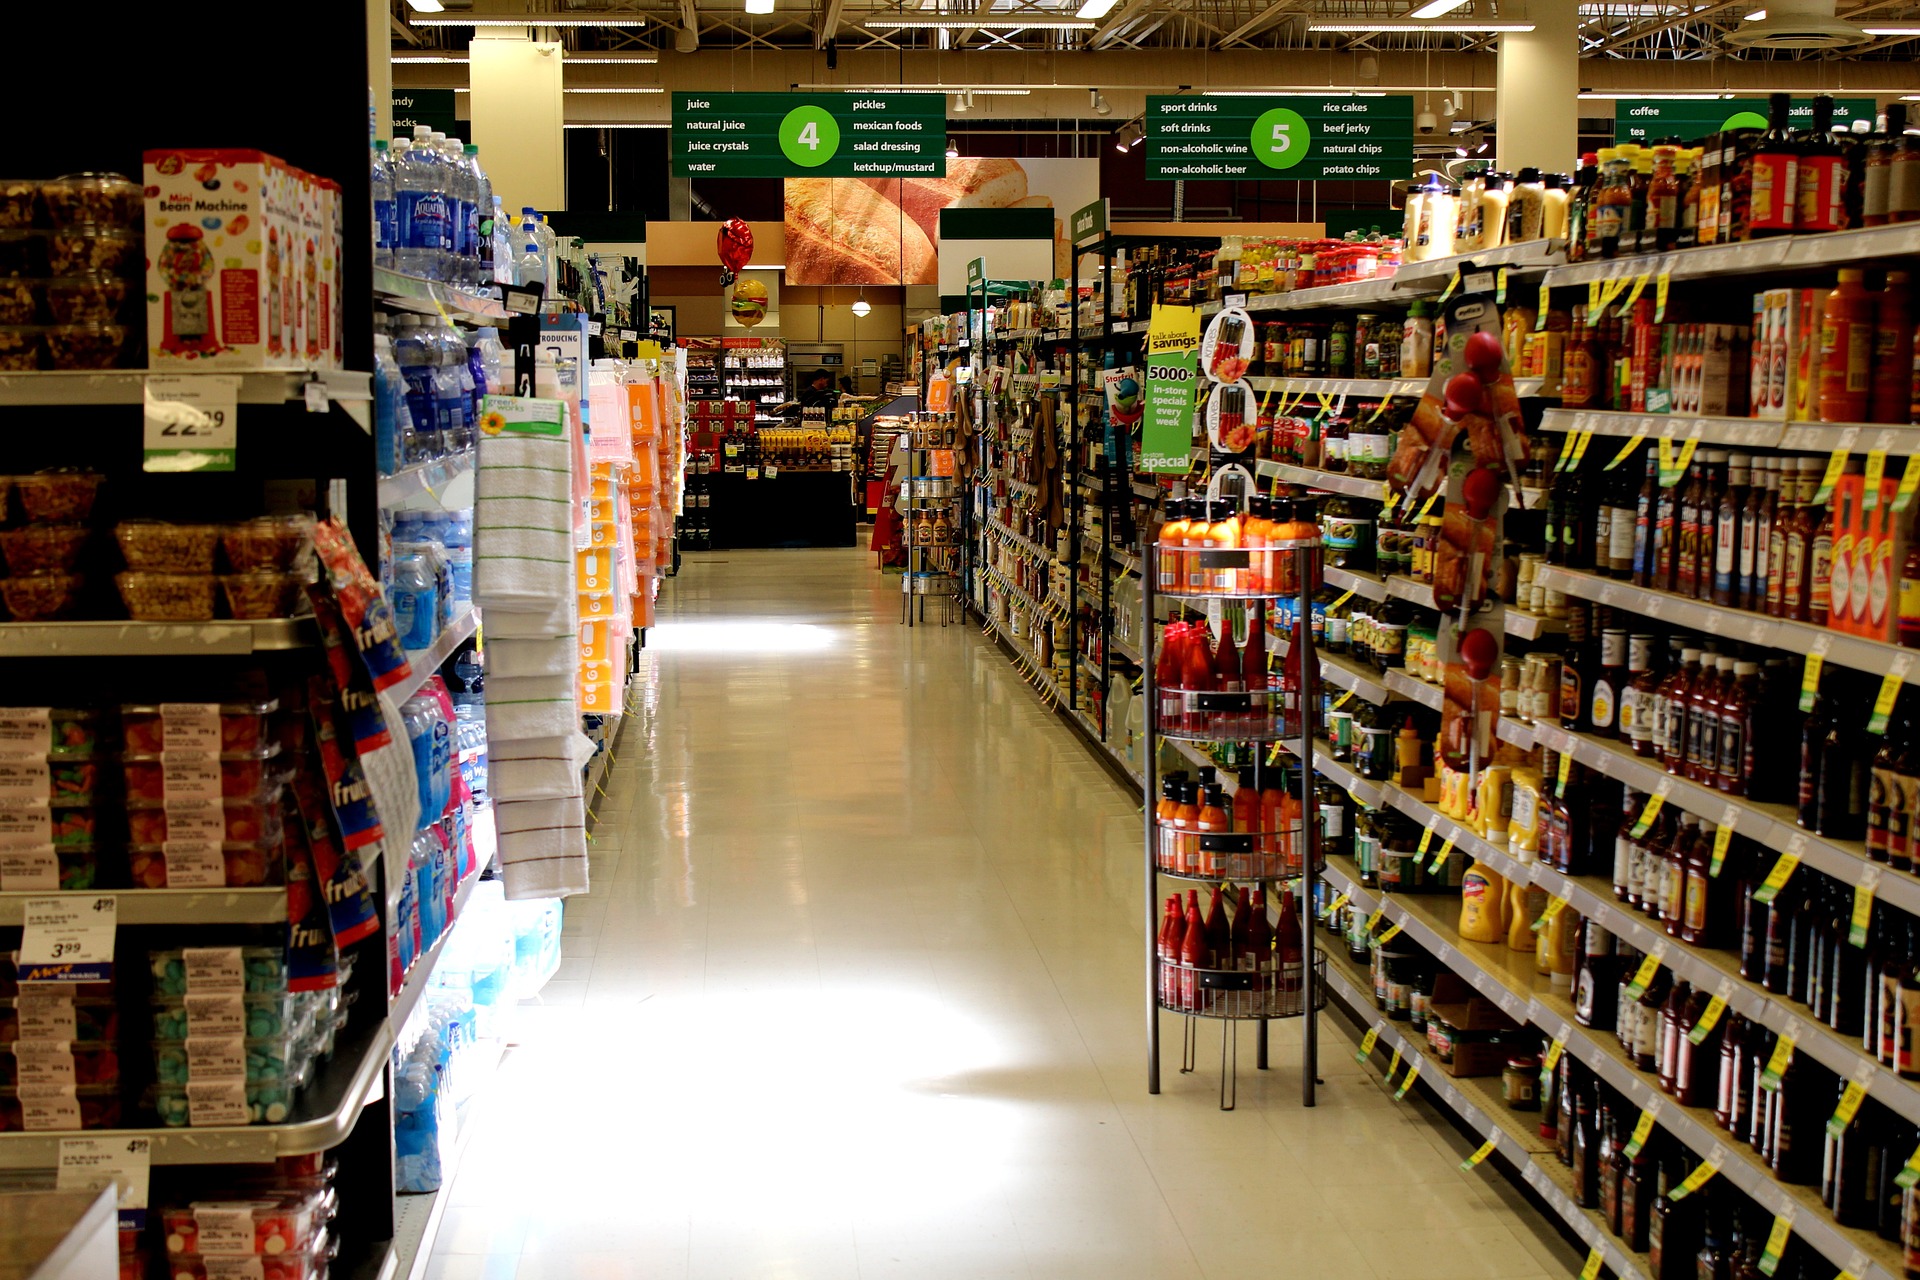 How To Navigate The Grocery Store For Healthy Eating?